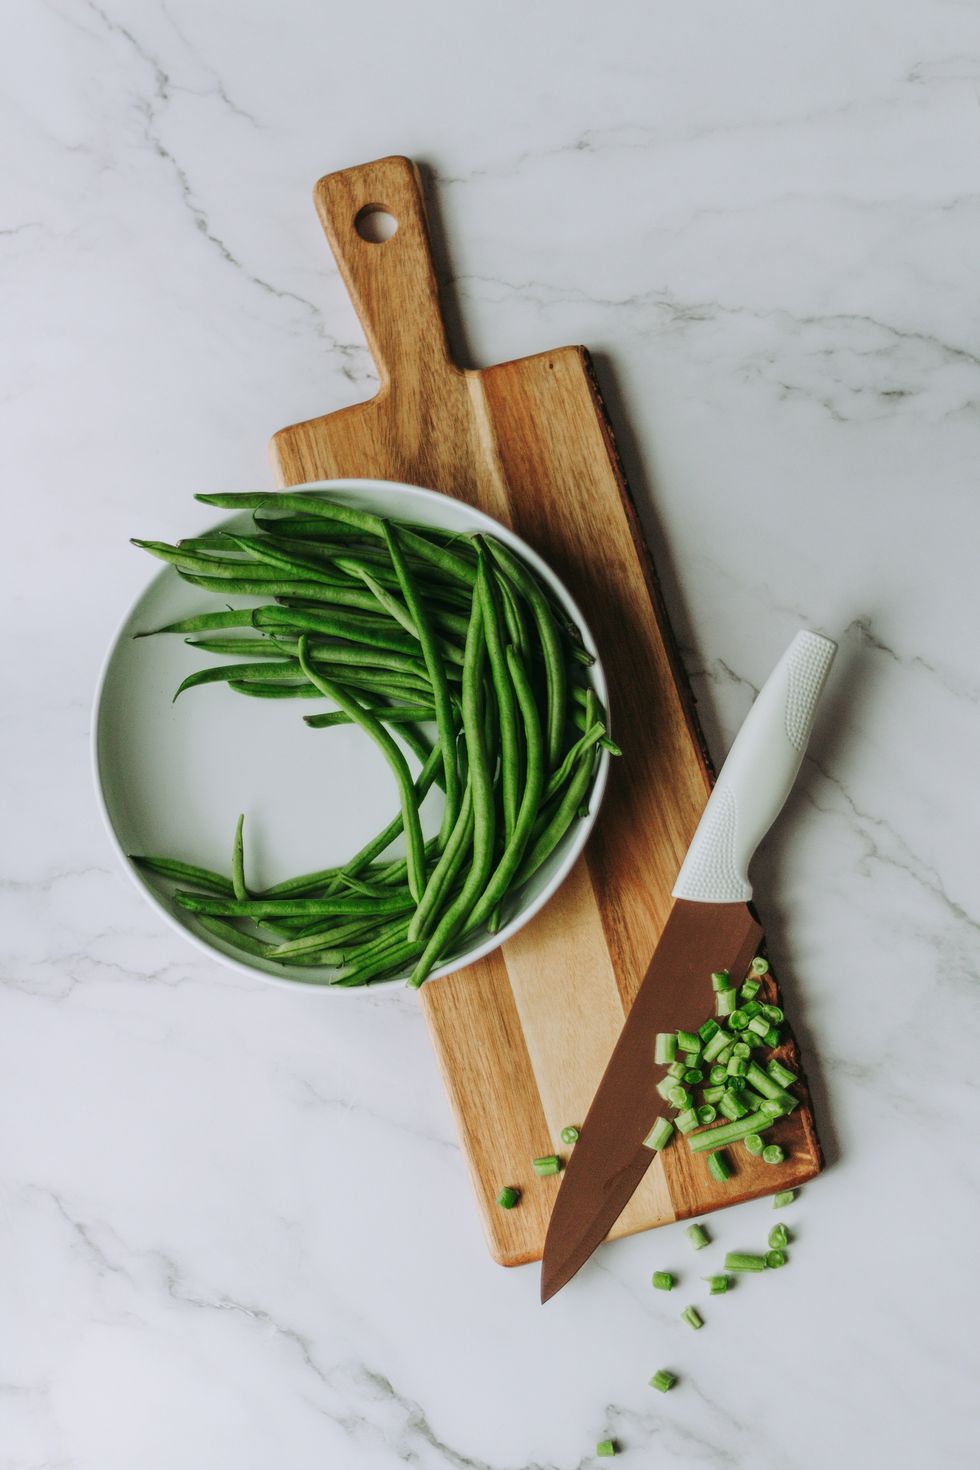 green beans on brown wooden chopping board with chef's knife